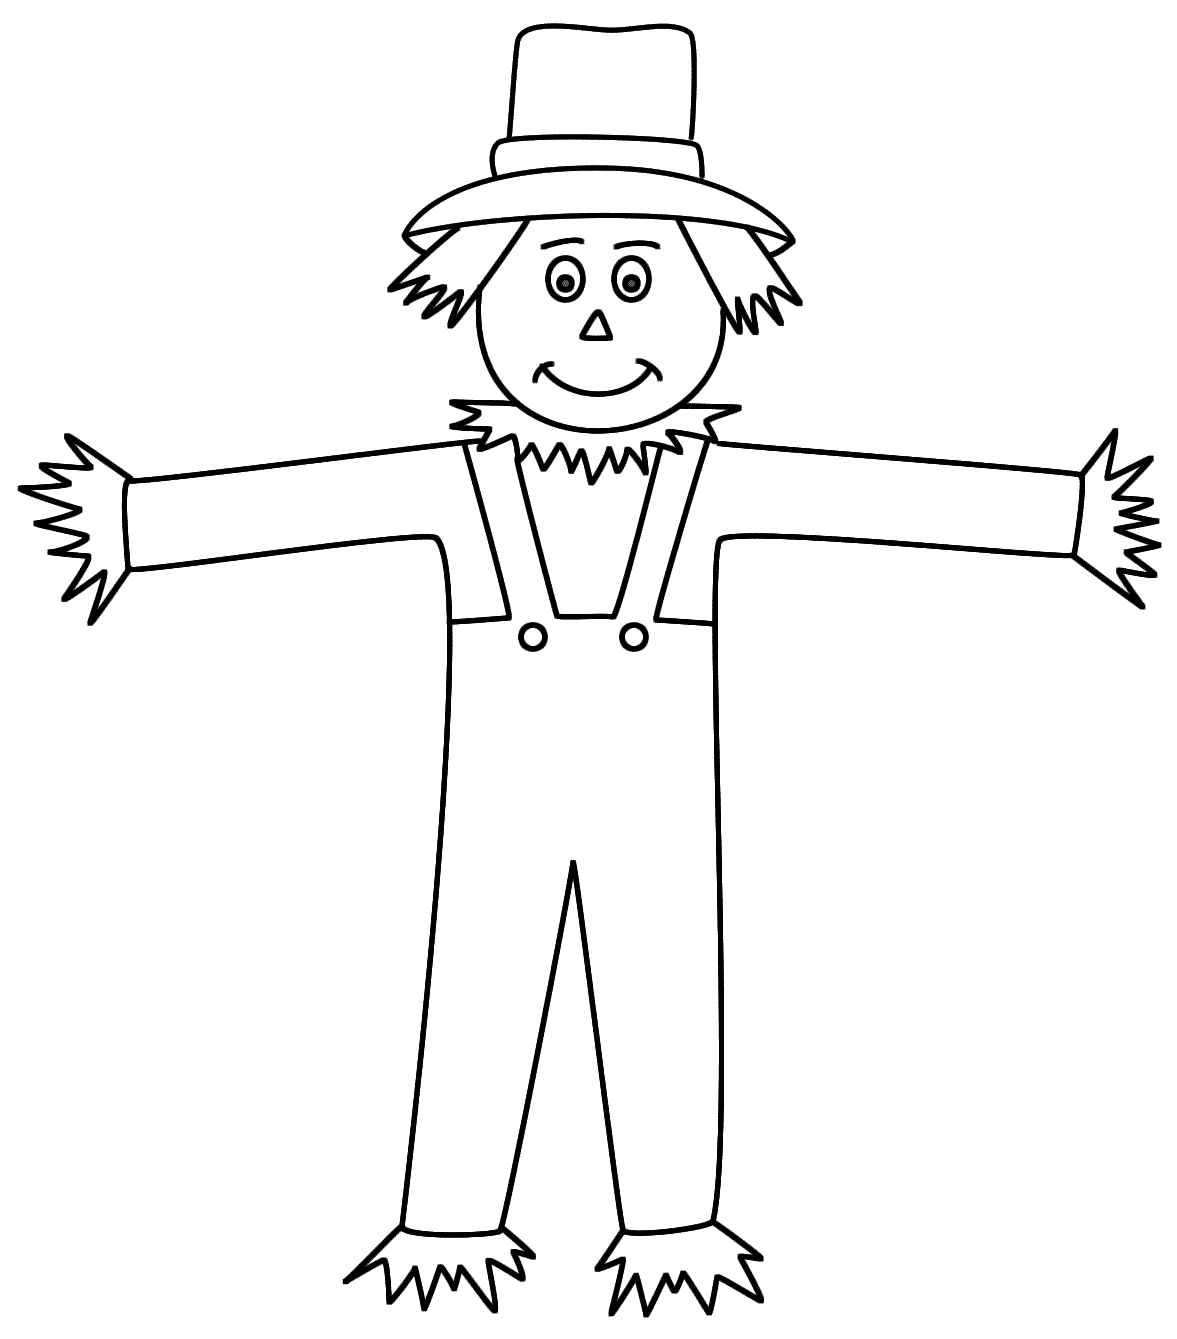 Scarecrow - Coloring Page (Autumn/Fall)